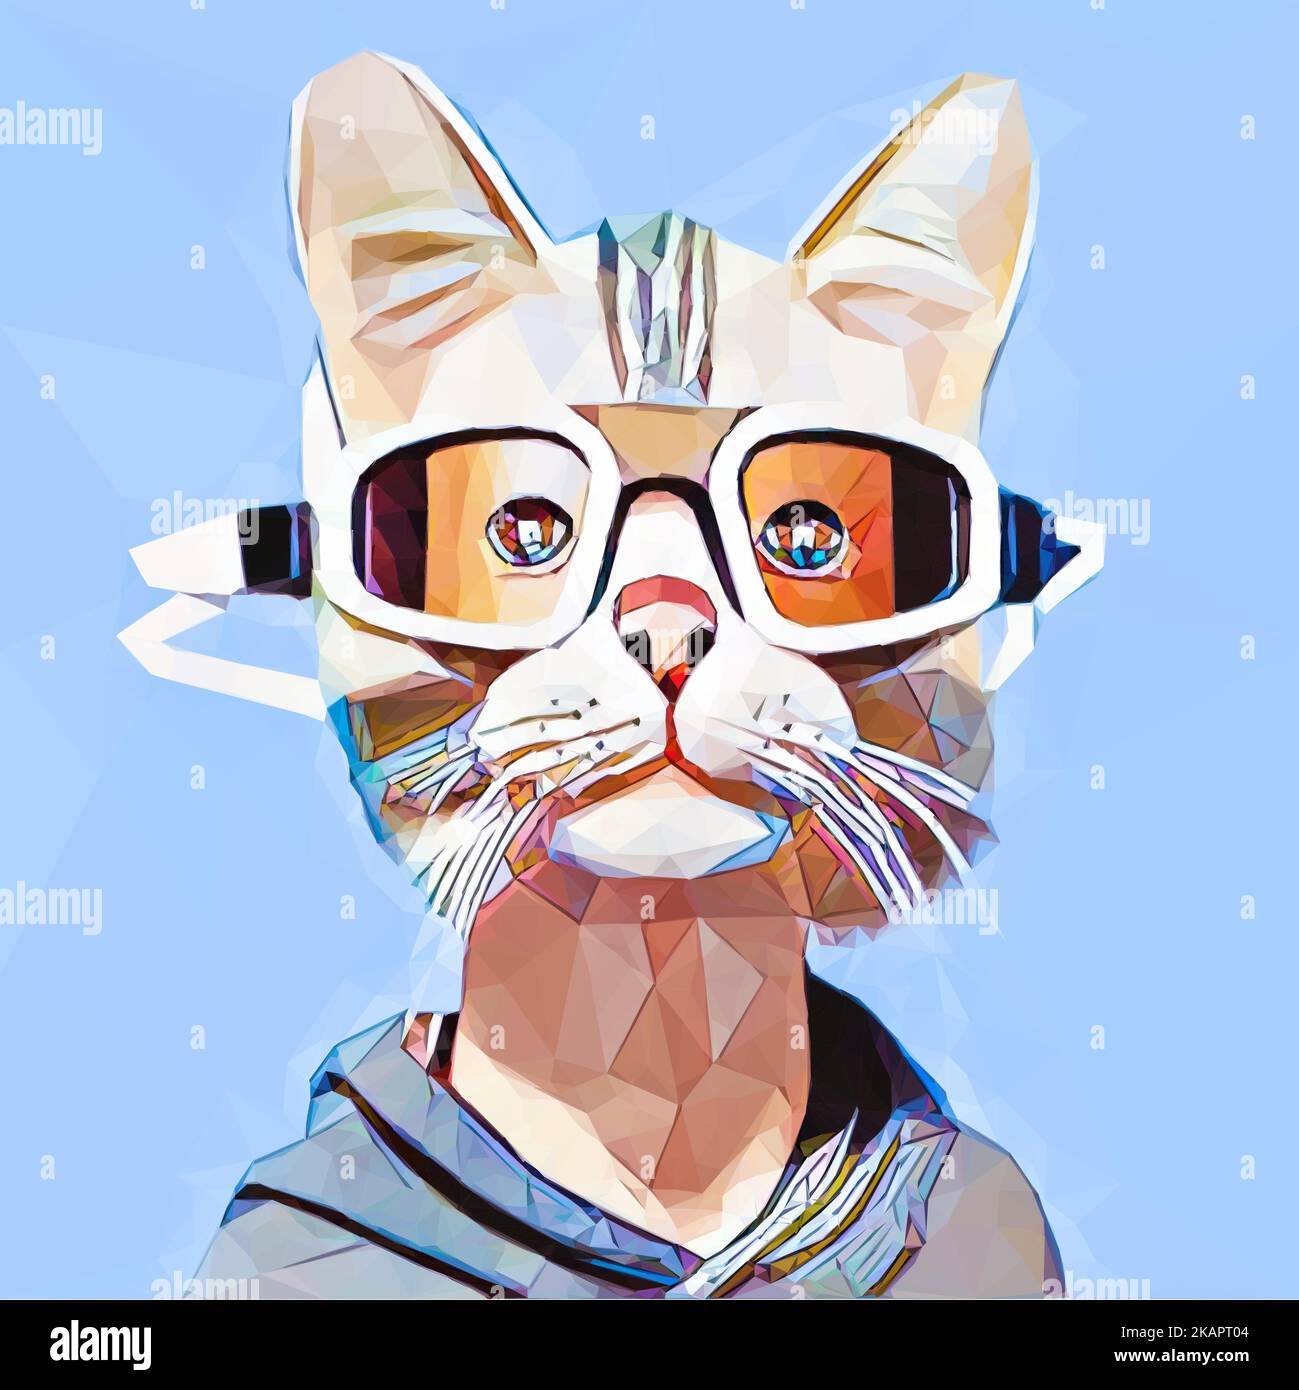 Character pets. Cat with sweater and glasses. Ilustration Vector in Low Poly Art. Stock Vector